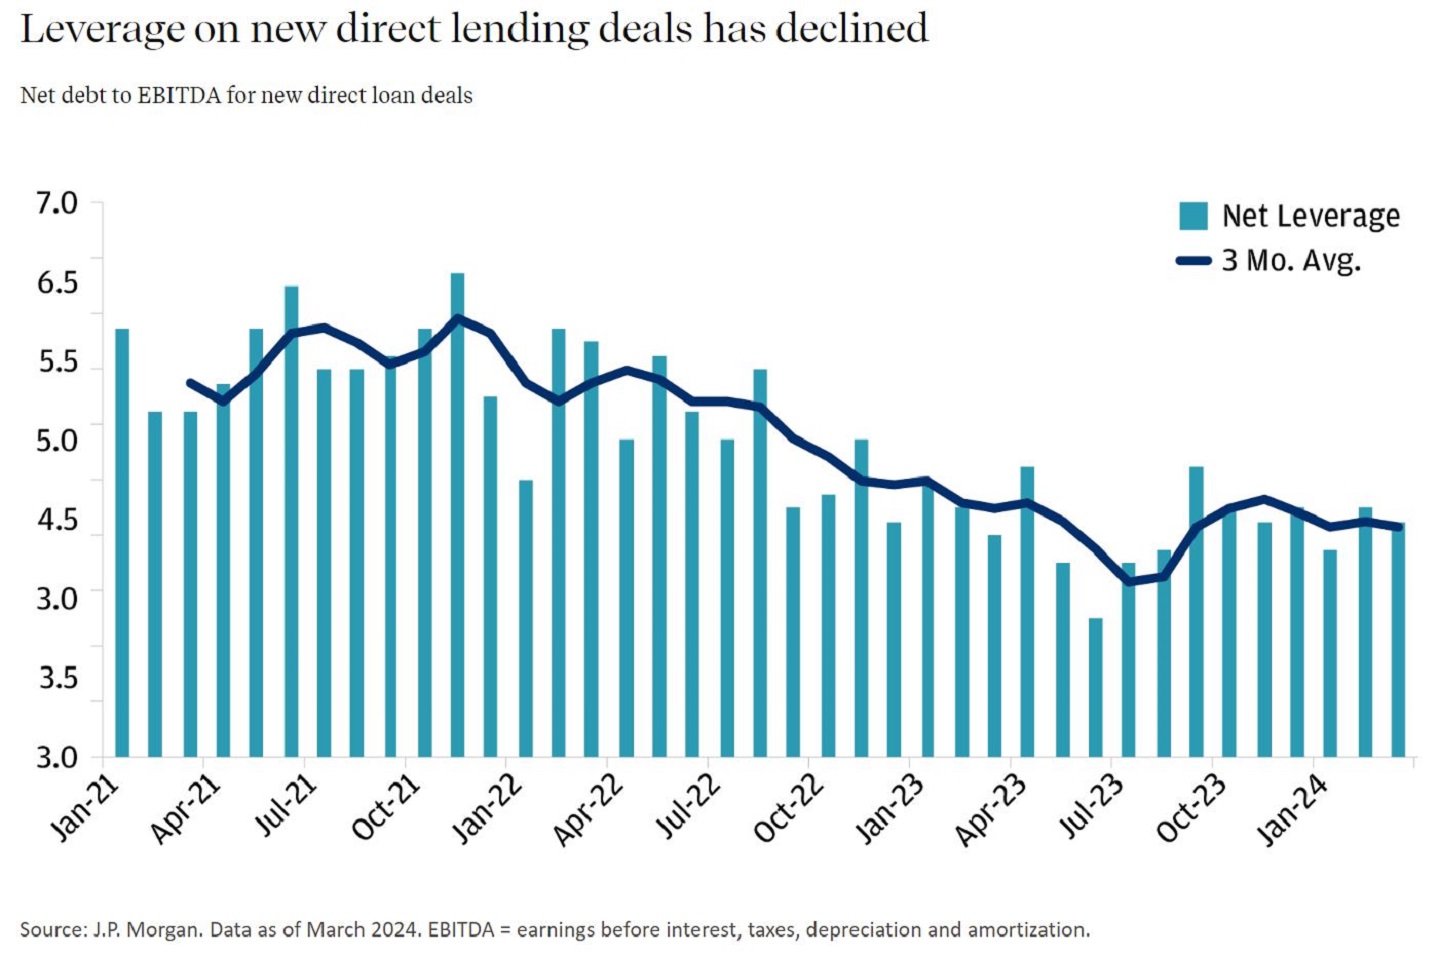 Bar and line chart showing net debt to EBITDA for new direct loan deals